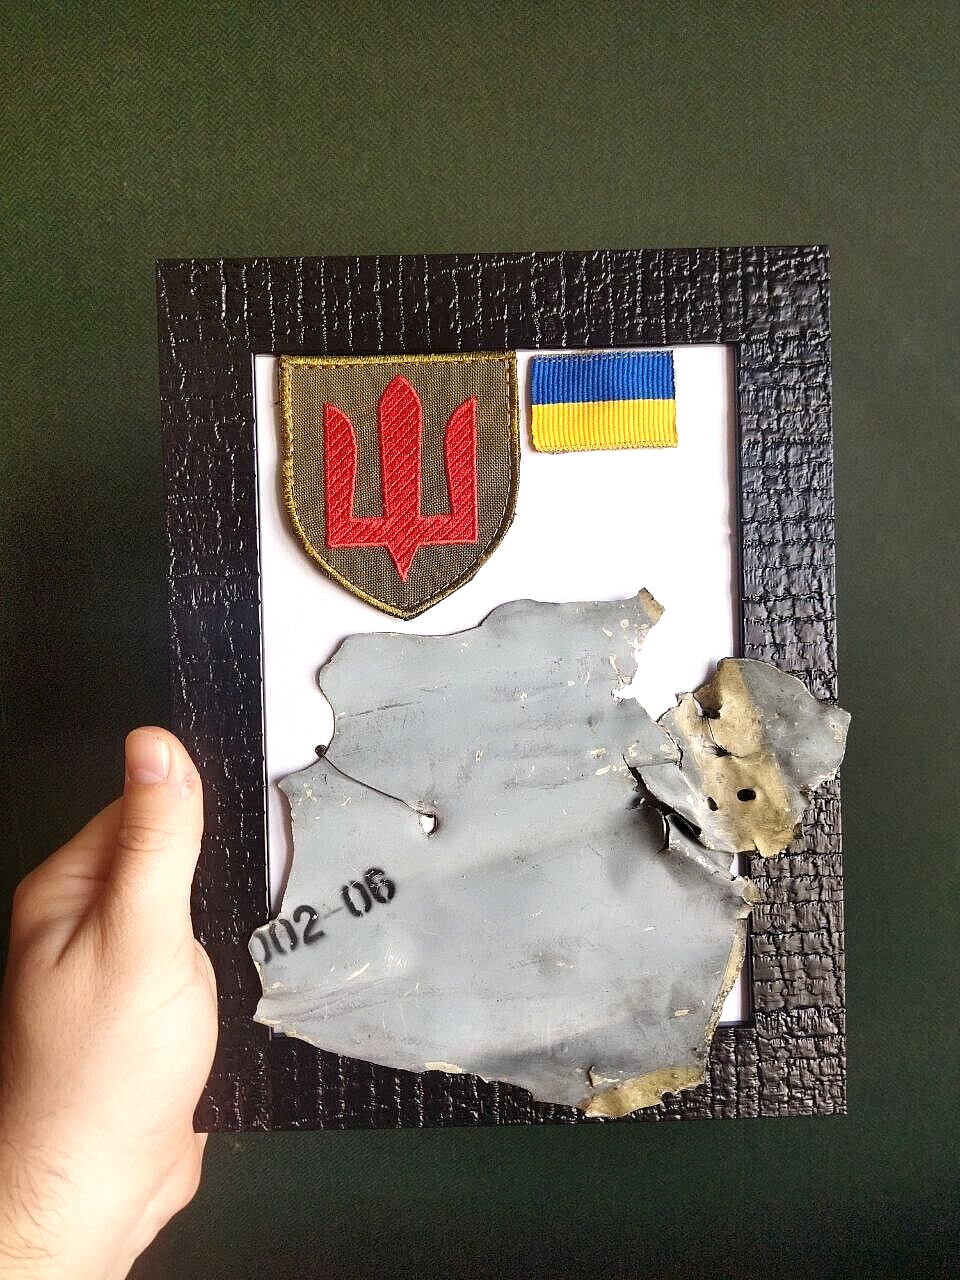 Ukraine 2022.Souvenir from a downed KA-52 helicopter